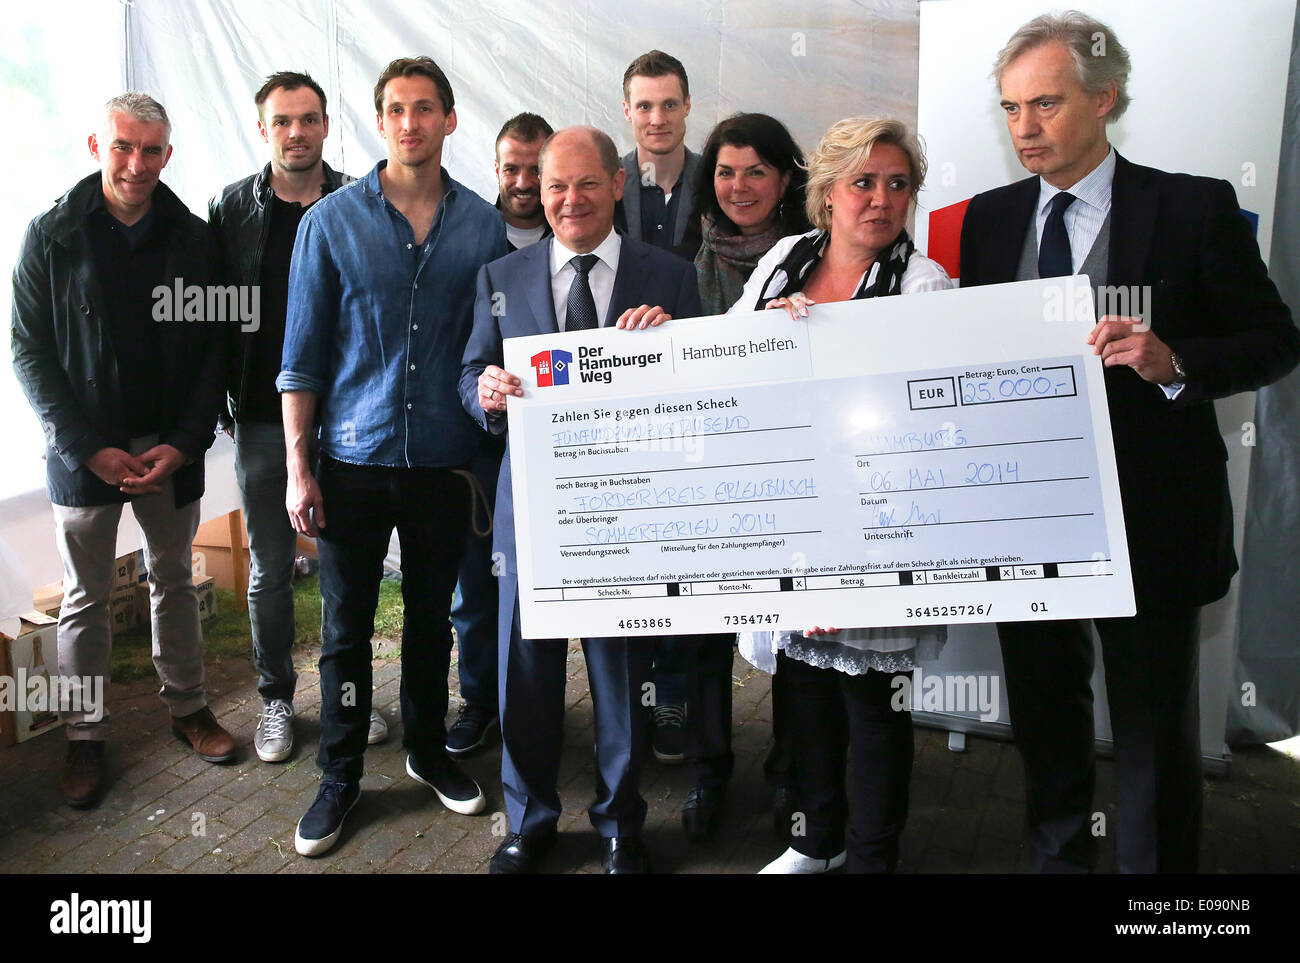 Hamburg, Germany. 06th May, 2014. CEO of Hamburger SV Carl-Edgar Jarchow (R) and Mayor of Hamburg Olaf Scholz (C) hand over a check for over 25,000 euros at Erlensbusch nursing home with HSV head coach Mirko Slomka (L) and HSV players Heiko Westermann (L-R), Rene Adler, Rafael van der Vaart und Marcell Jansen in Hamburg, Germany, 06 May 2014. Erlenbusch is a nursing home for seriously disabled children and is the current support project of the 'Hamburger Weg' (Hamburg Path) and the city of Hamburg. Photo: AXEL HEIMKEN/dpa/Alamy Live News Stock Photo